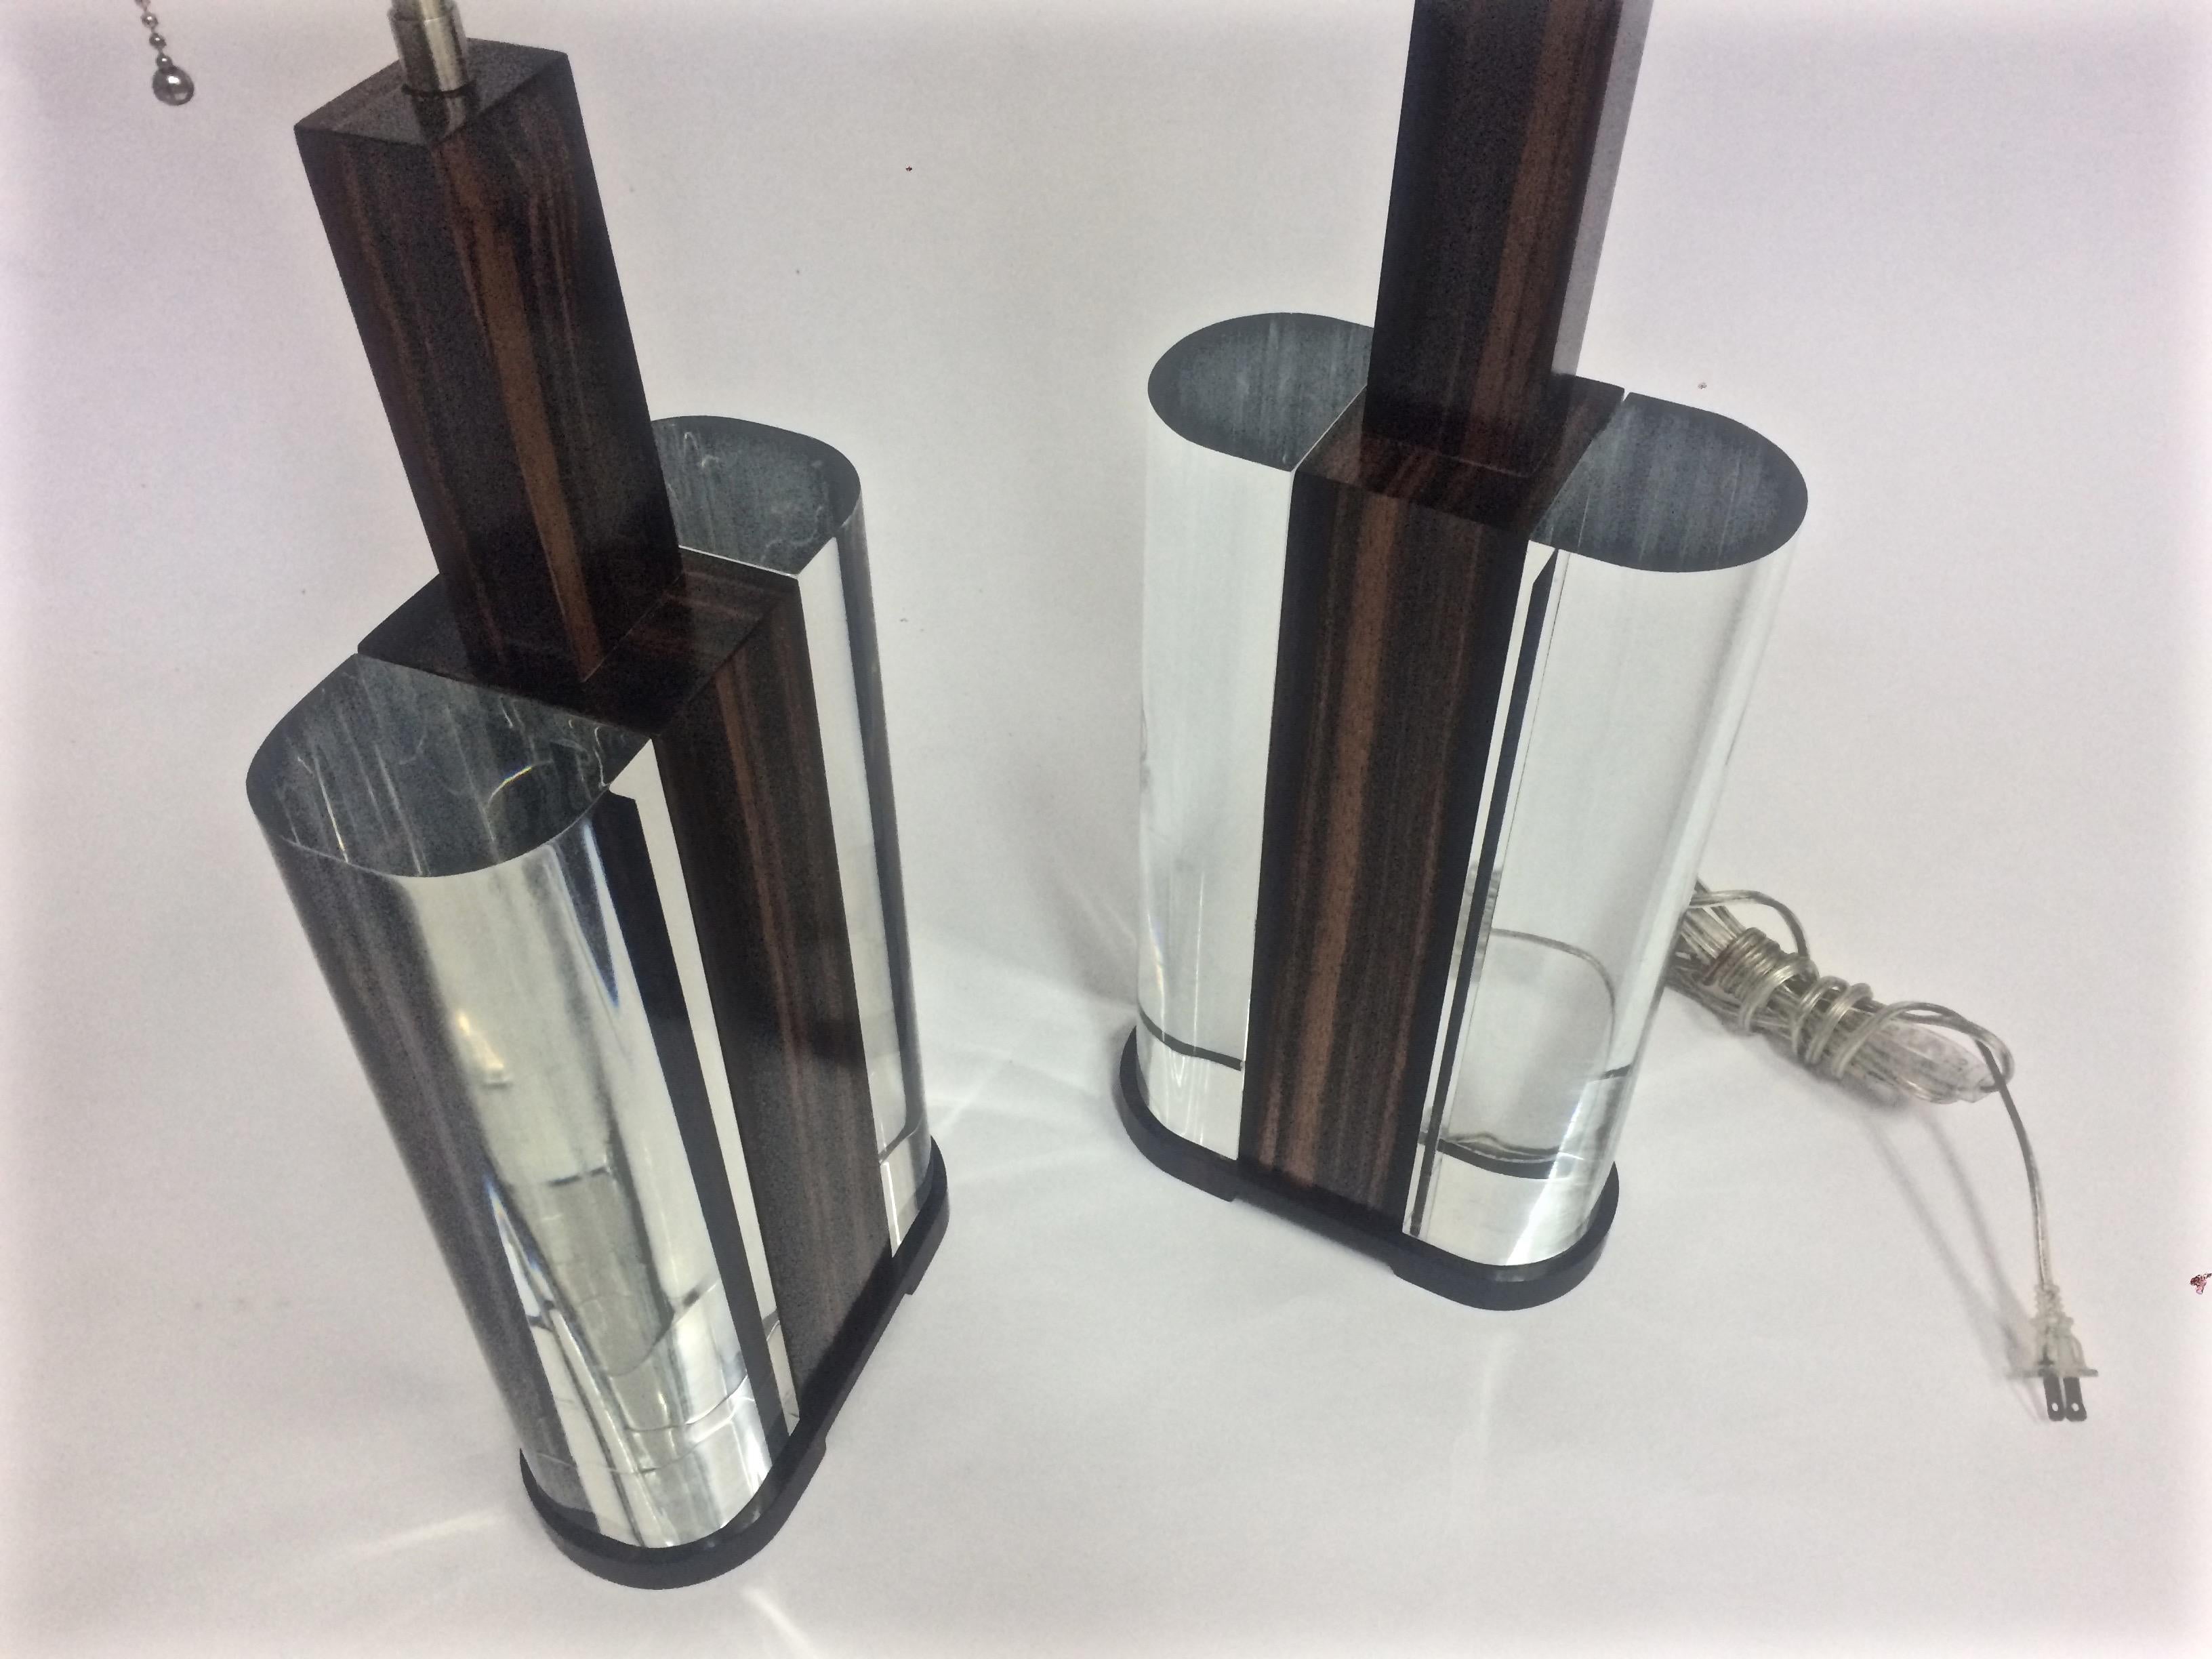 Mid-Century Modern acrylic and Macassar ebony wood matched pair of lamps, the solid satin stainless steel dual light sockets with a square finial to lock the shade and an on/off pull chain over a supporting Macassar ebony wood standard, the body is